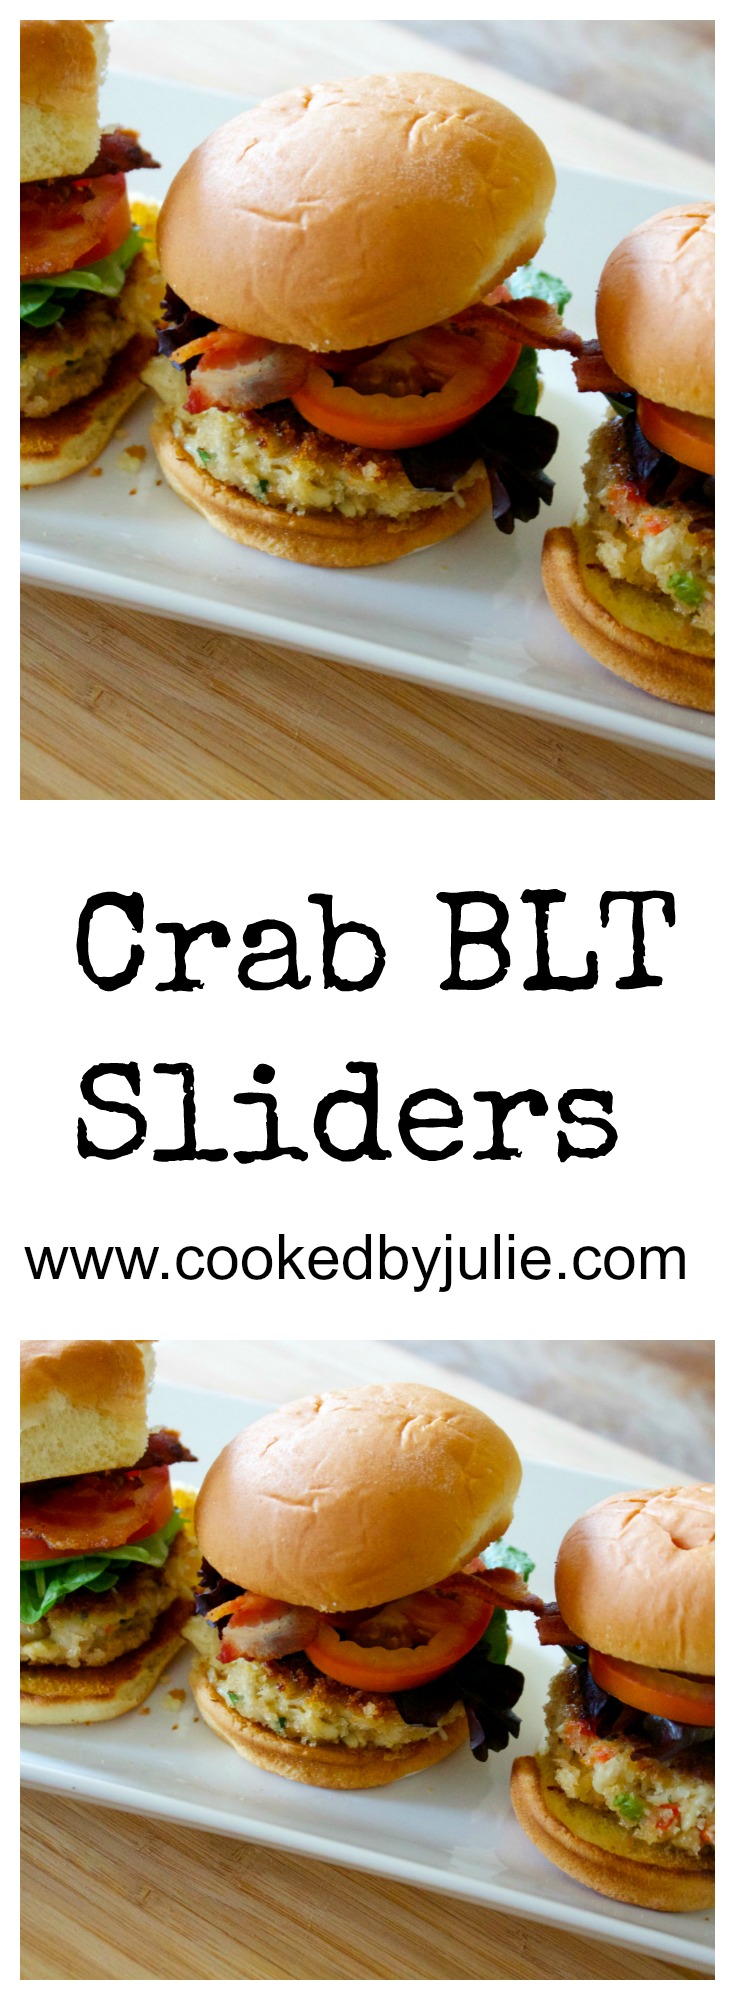 Homemade Crab Cake BLT Sliders | Video and Recipe from Cooked By Julie